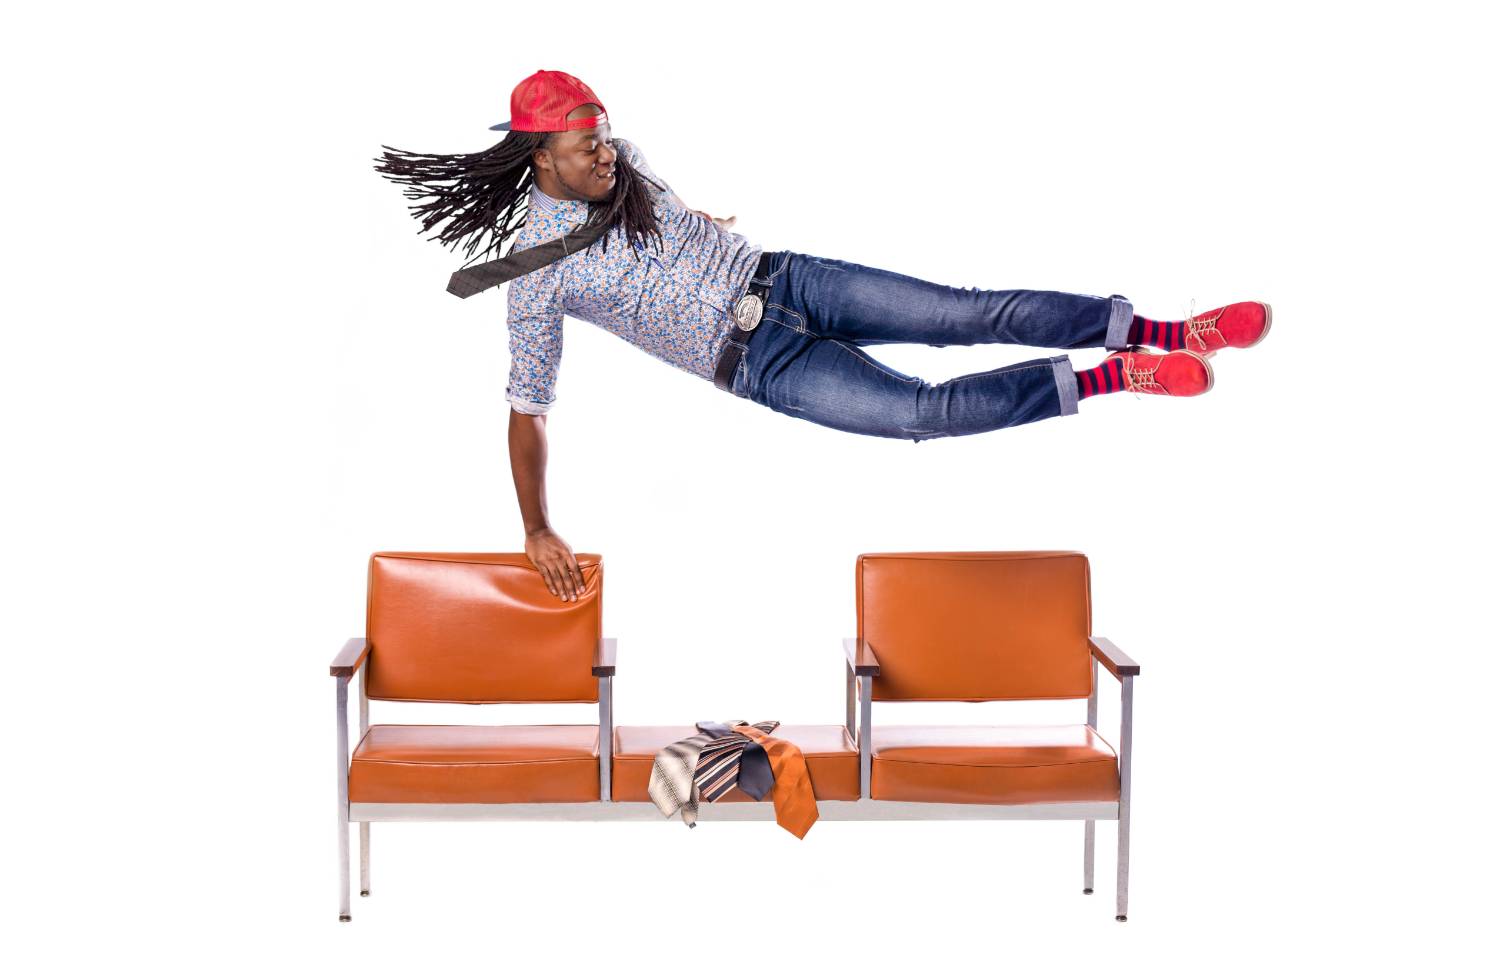 person in read backwards cap leaping sideways over a bench